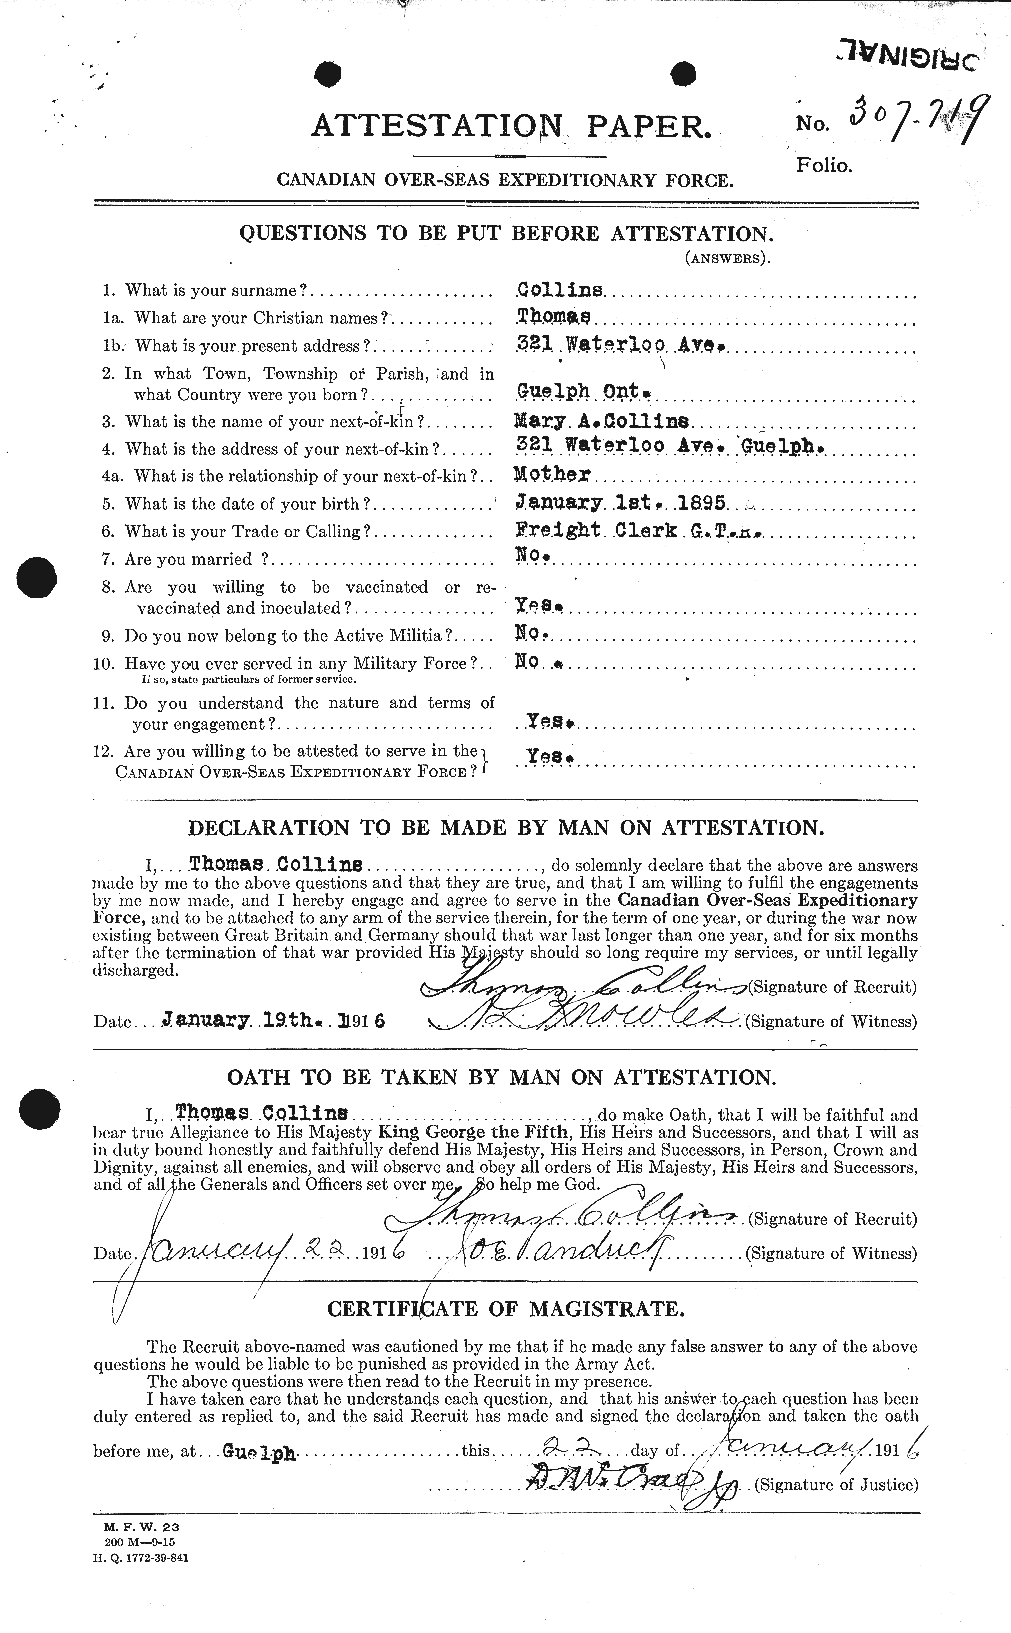 Personnel Records of the First World War - CEF 069146a